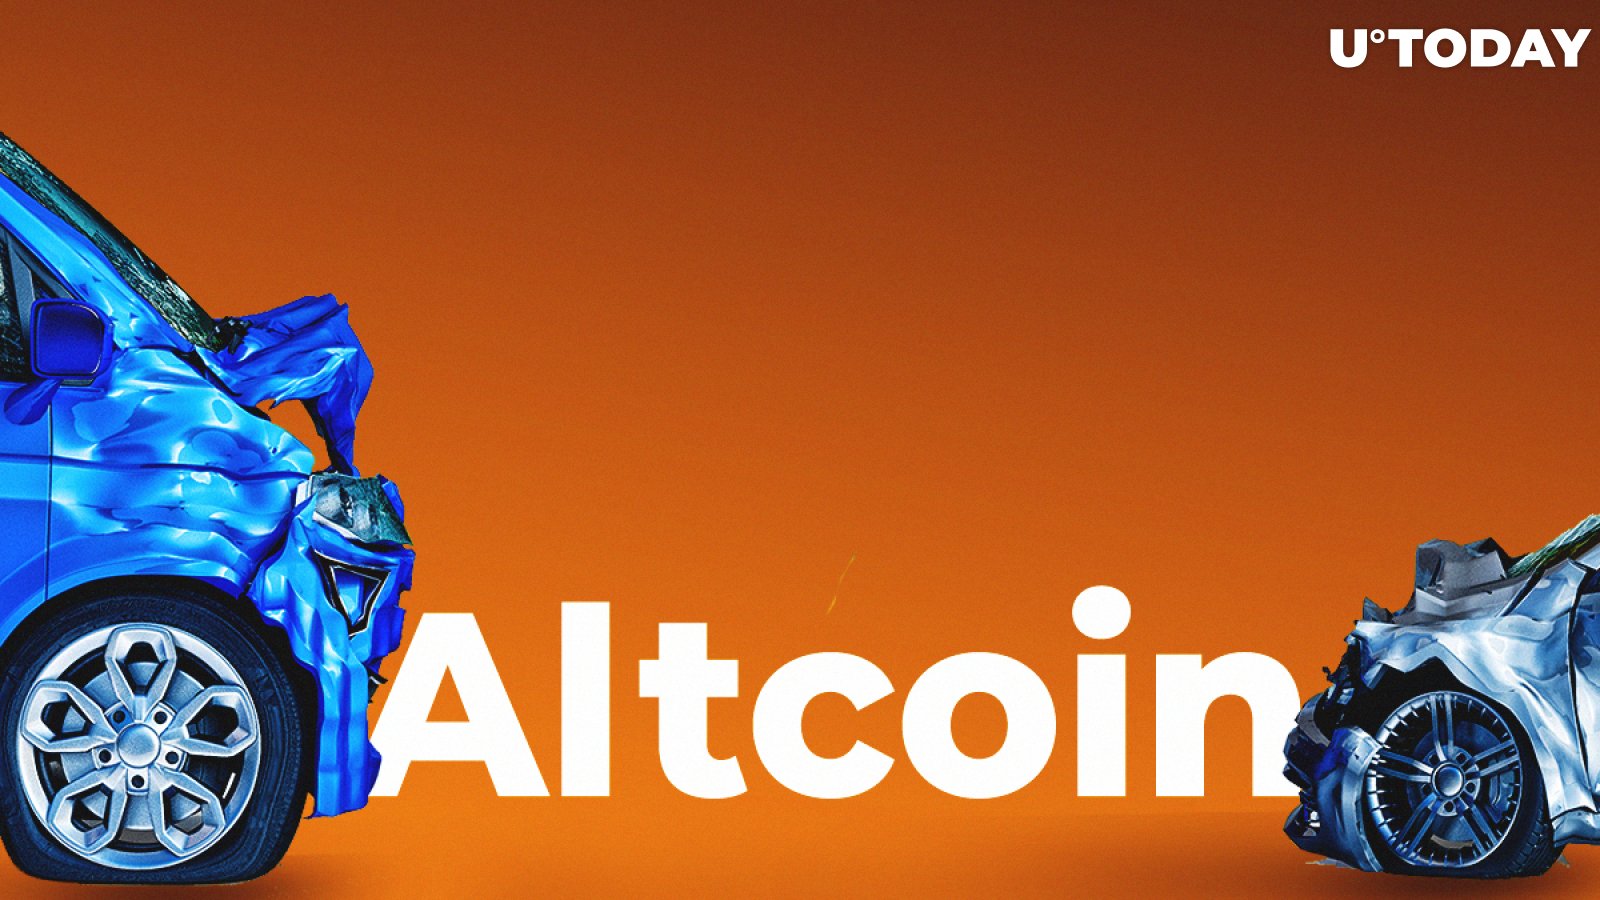 Bitcoin (BTC) Dominance Pullback Crashing Altcoins – Is This End of Altcoin Season?